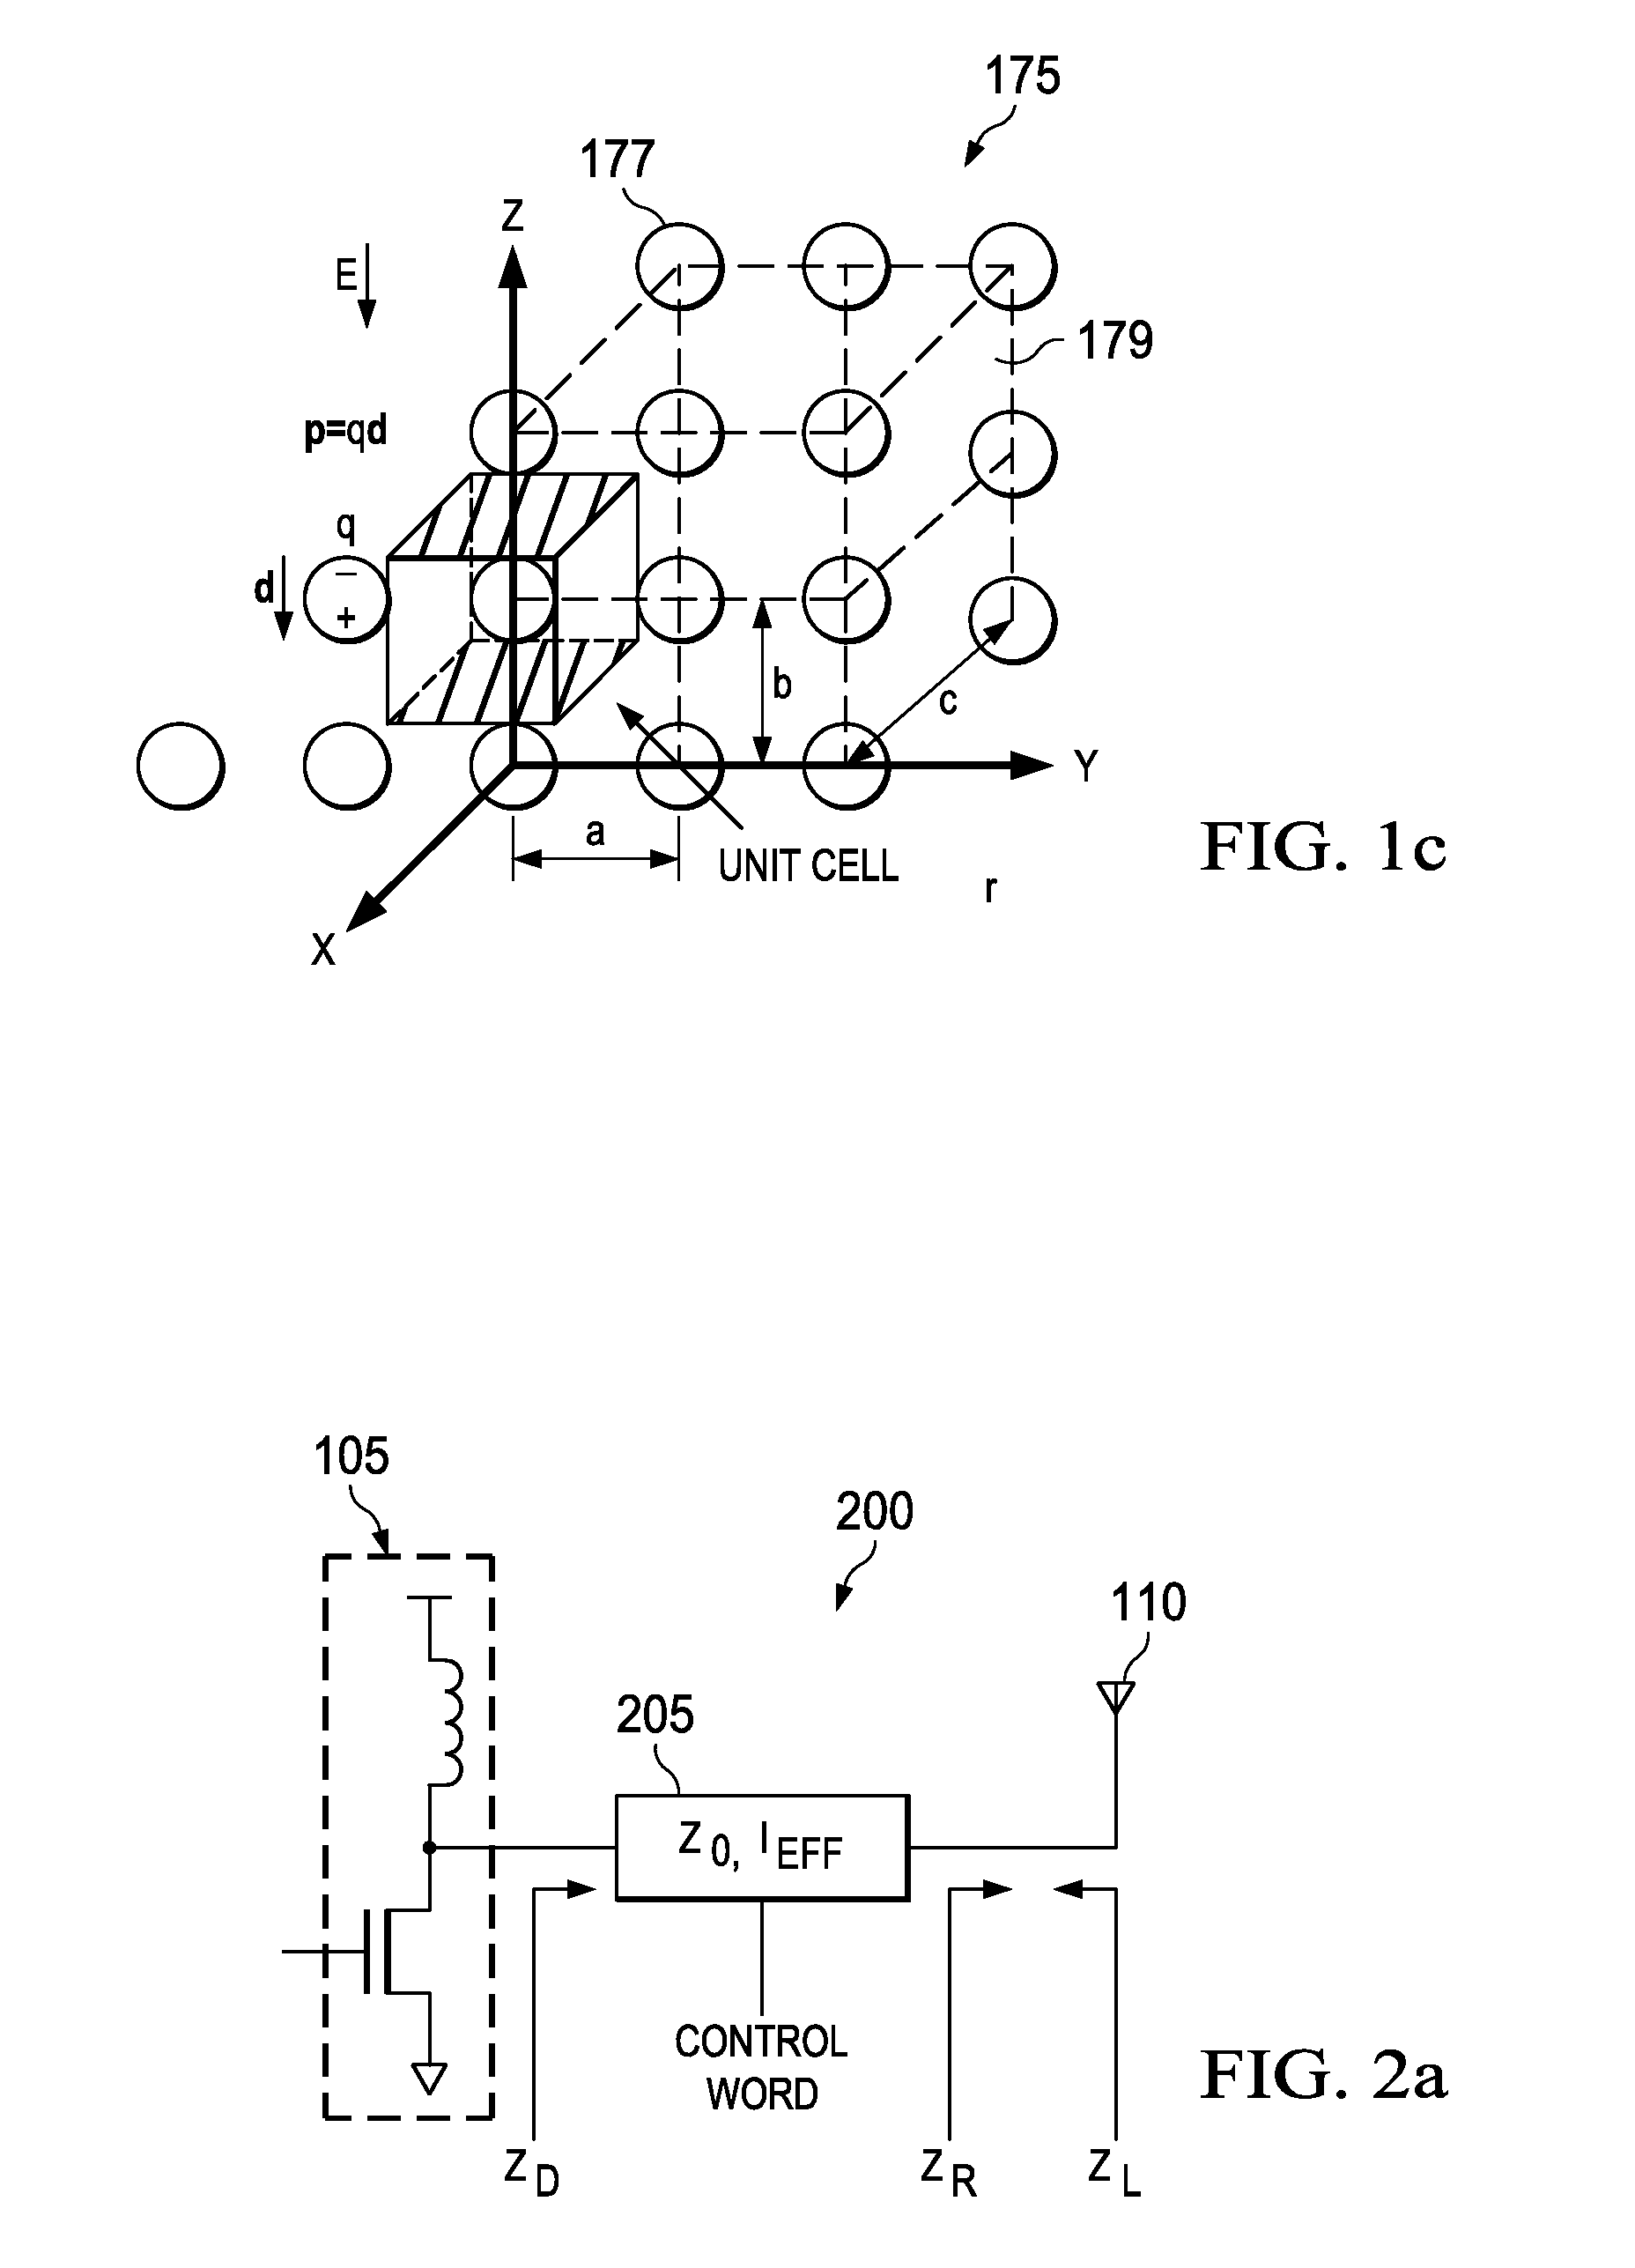 System and Method for Impedance Mismatch Compensation in Digital Communications Systems